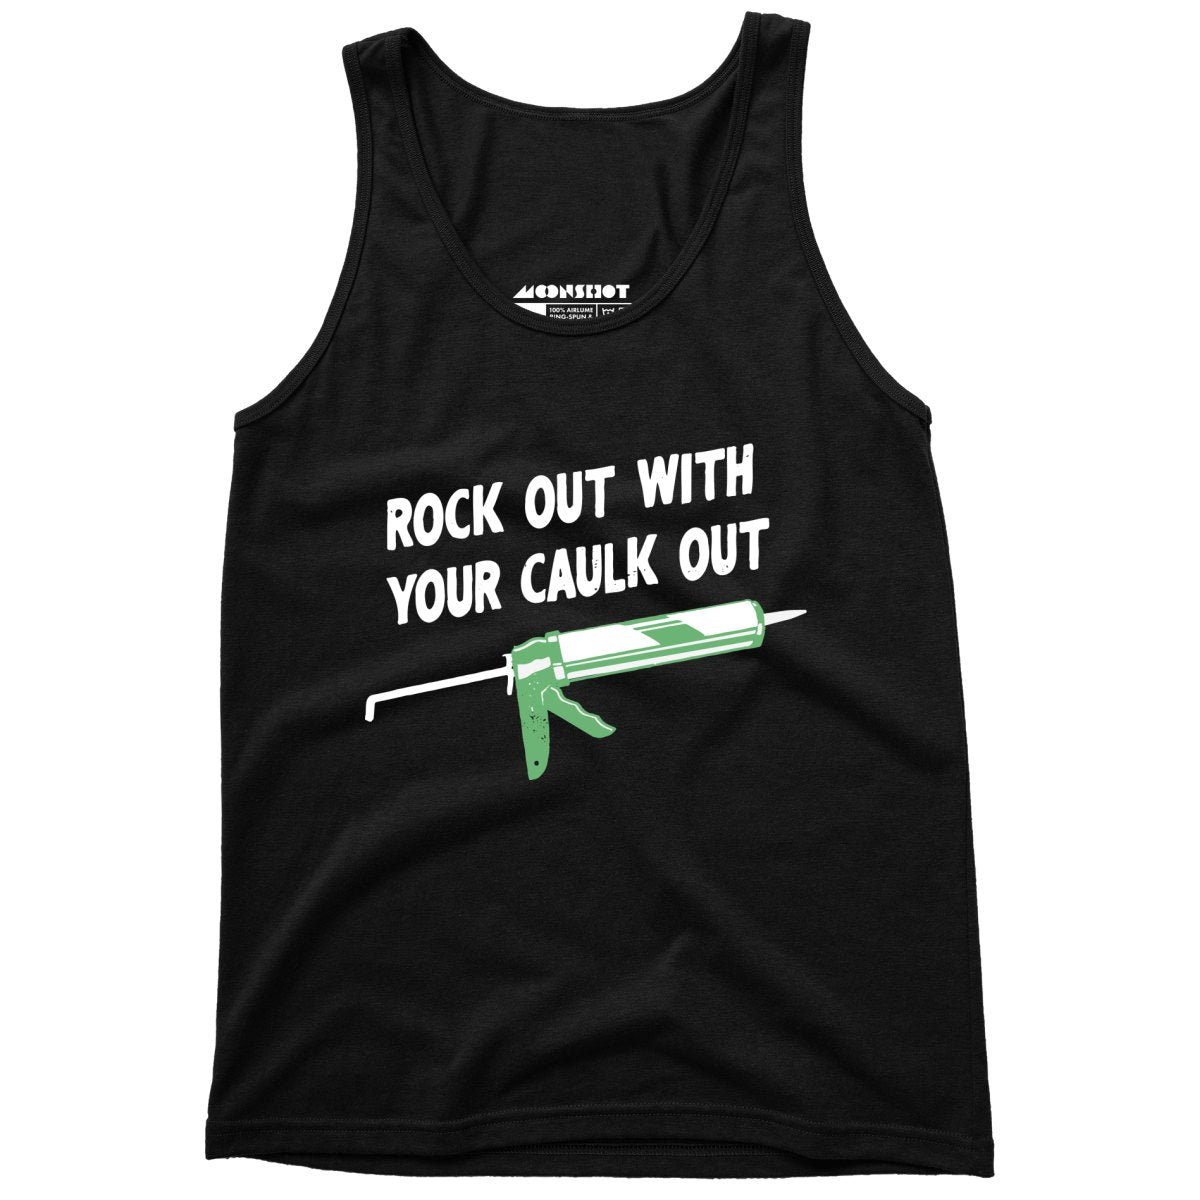 Rock Out With Your Caulk Out - Unisex Tank Top